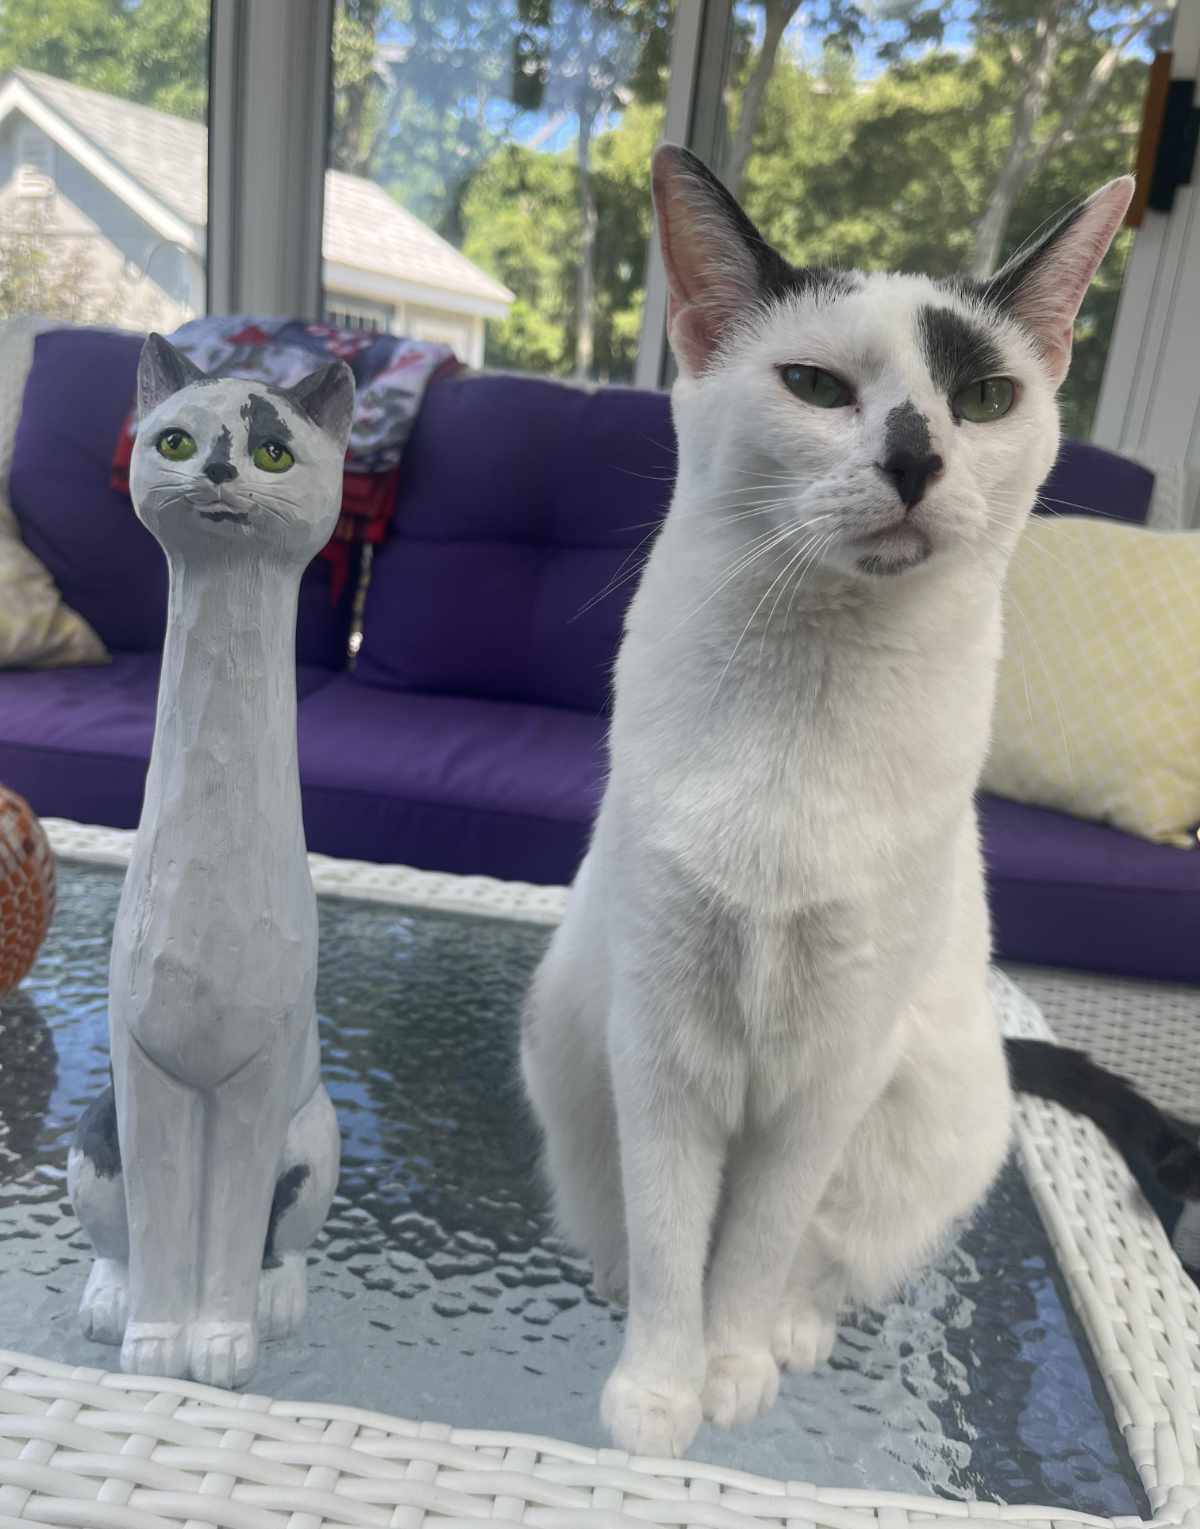 A cat statue painted to match my cat